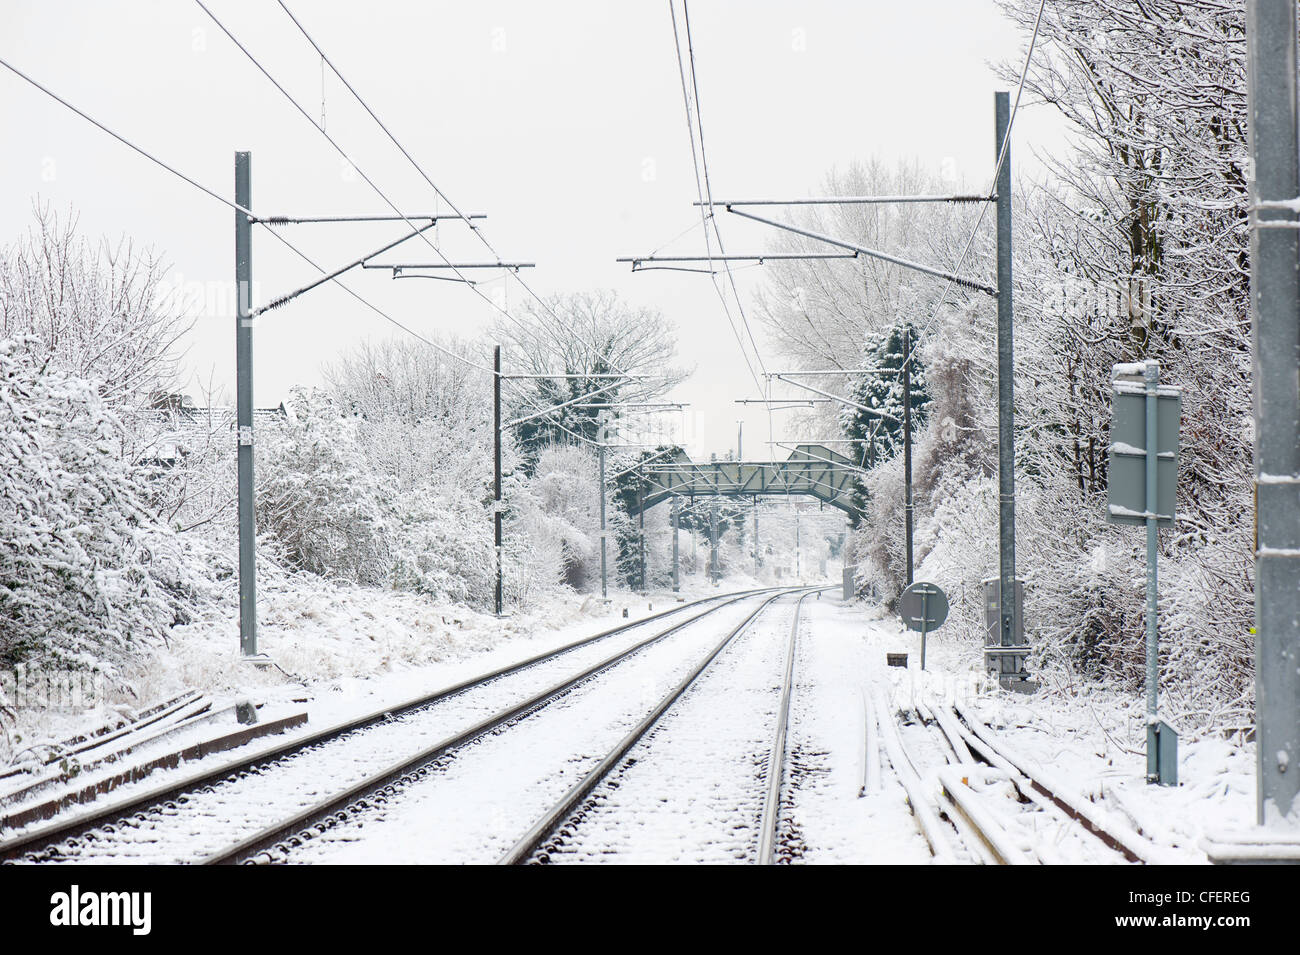 Railway track covered in snow, Acton Central, London, United Kingdom Stock Photo